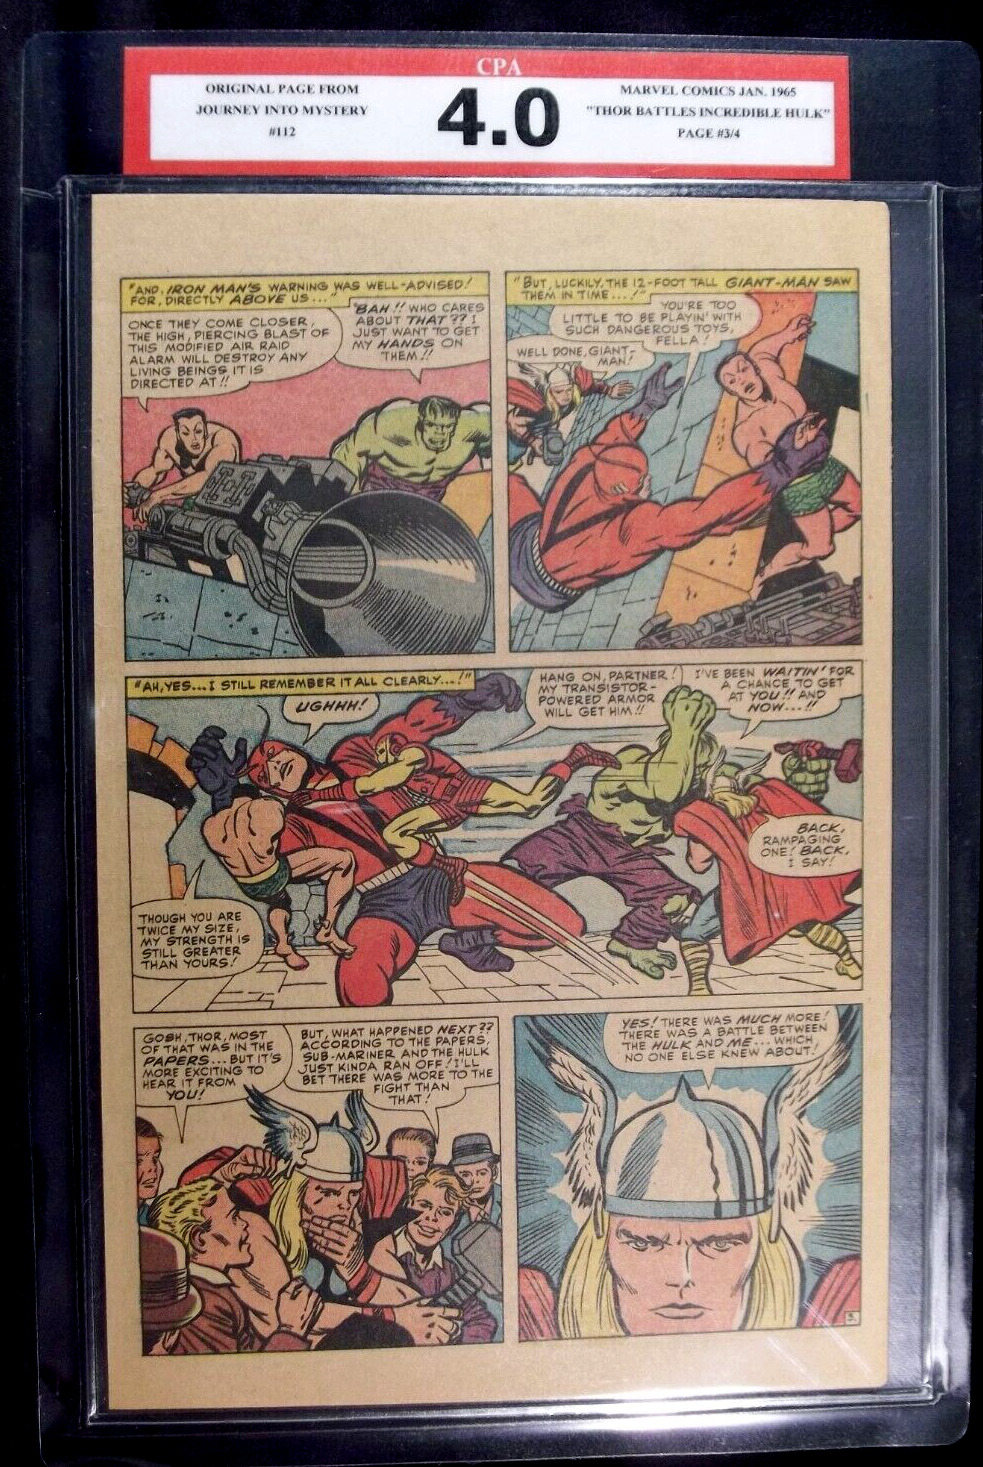 Journey Into Mystery #112 CPA 4.0 SINGLE PAGE #3/4  Hulk vs Thor